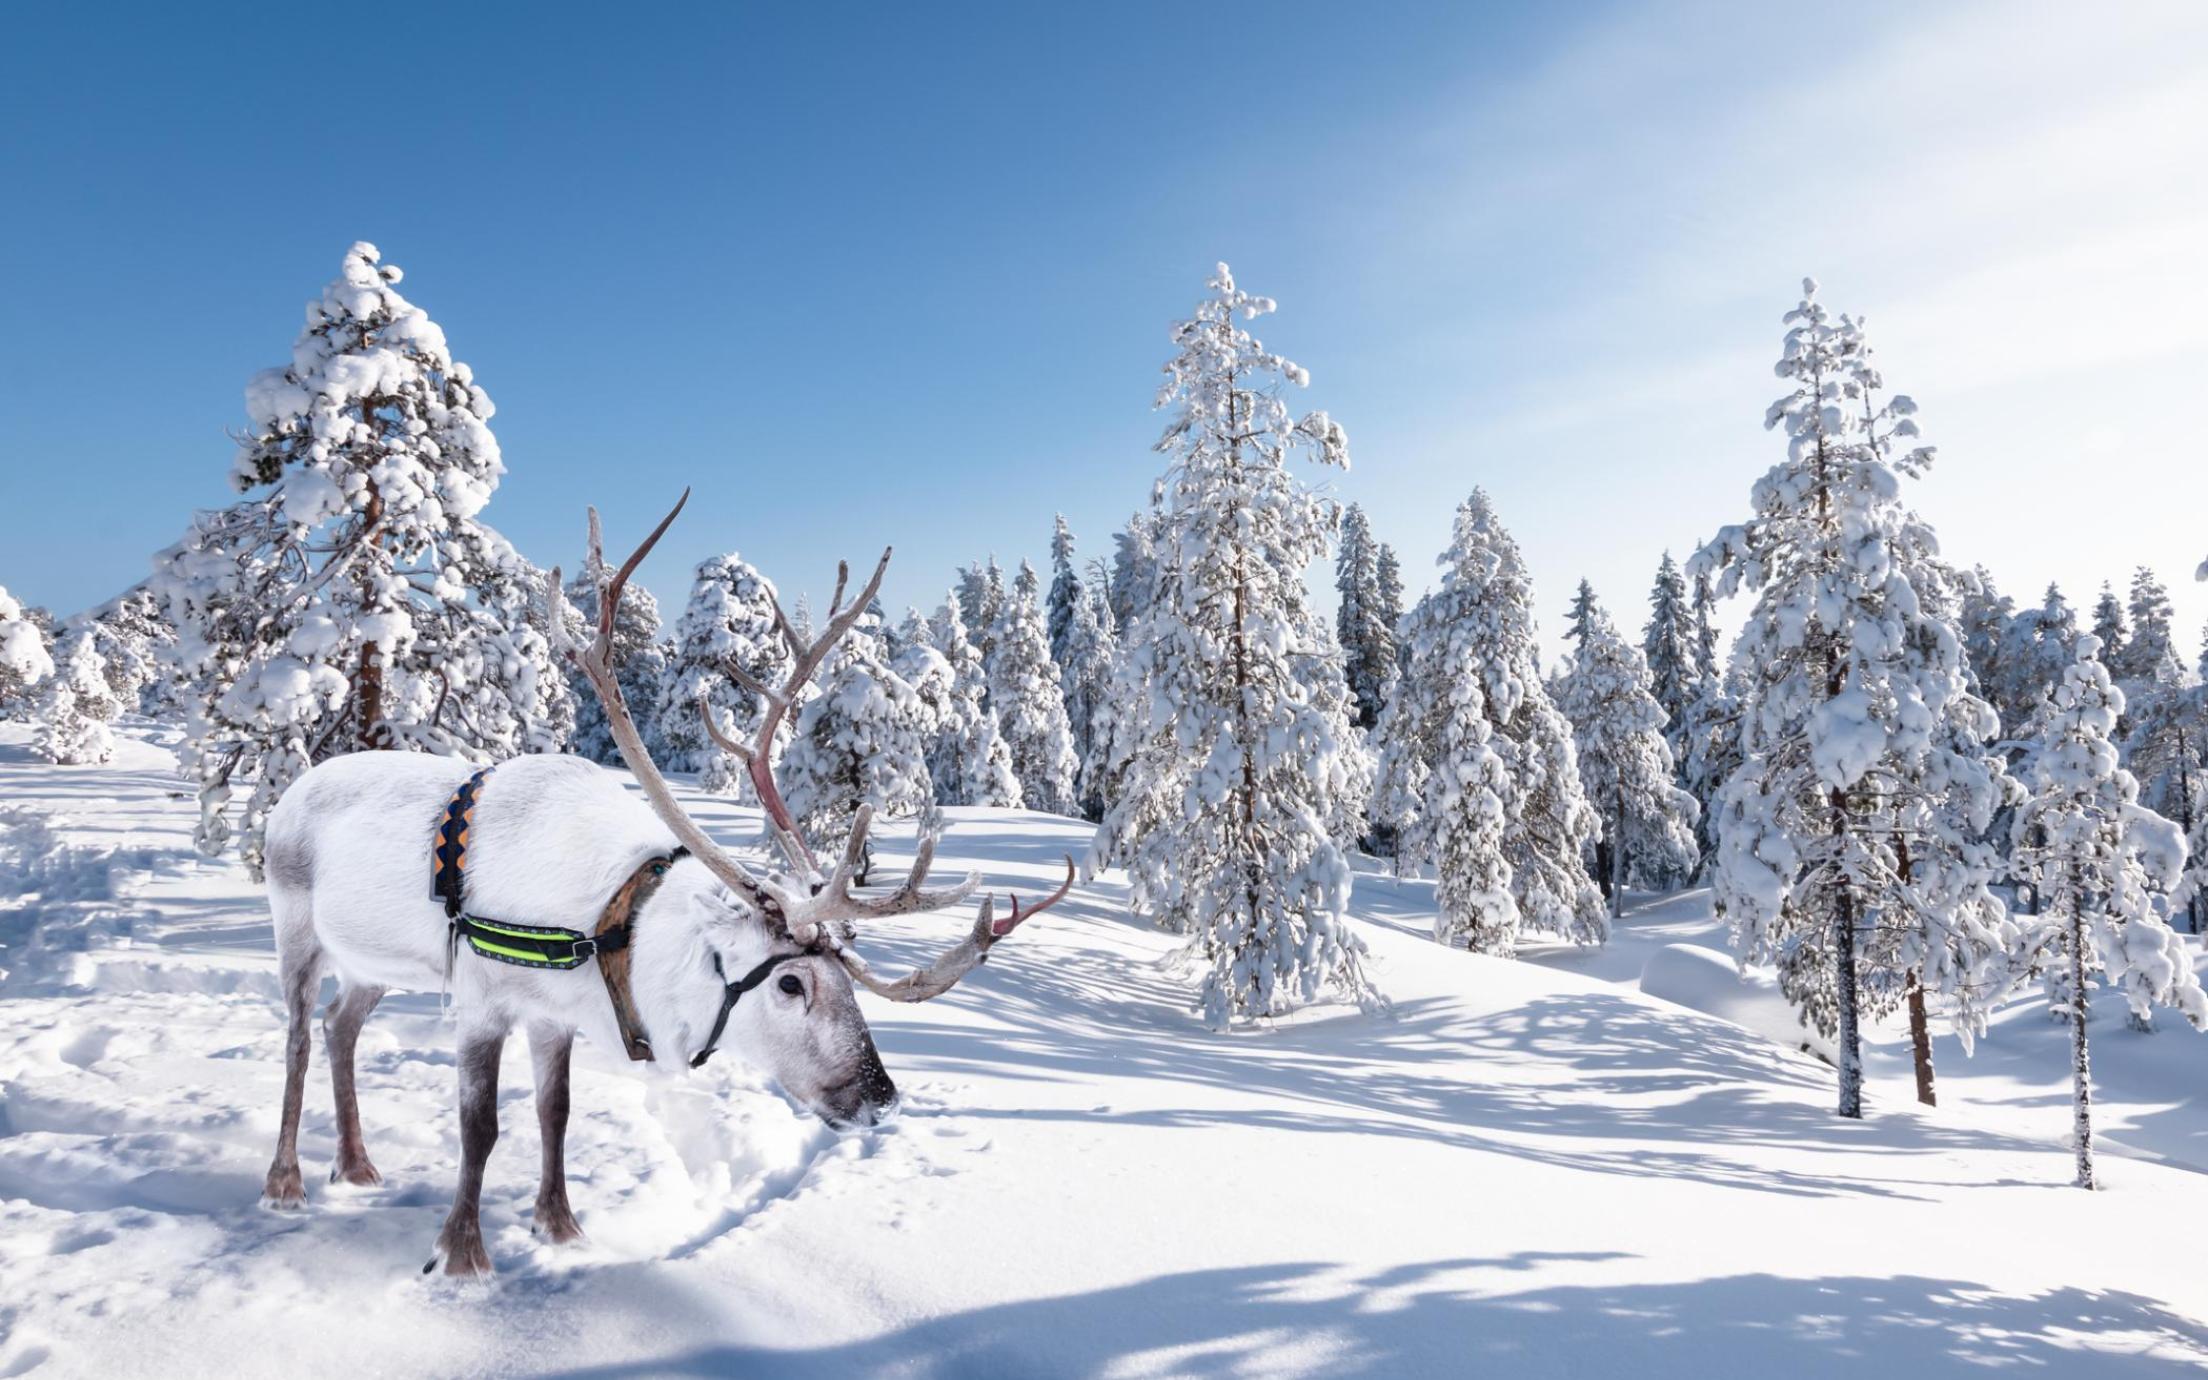 An animal with a rack on its head in a snowy landscape